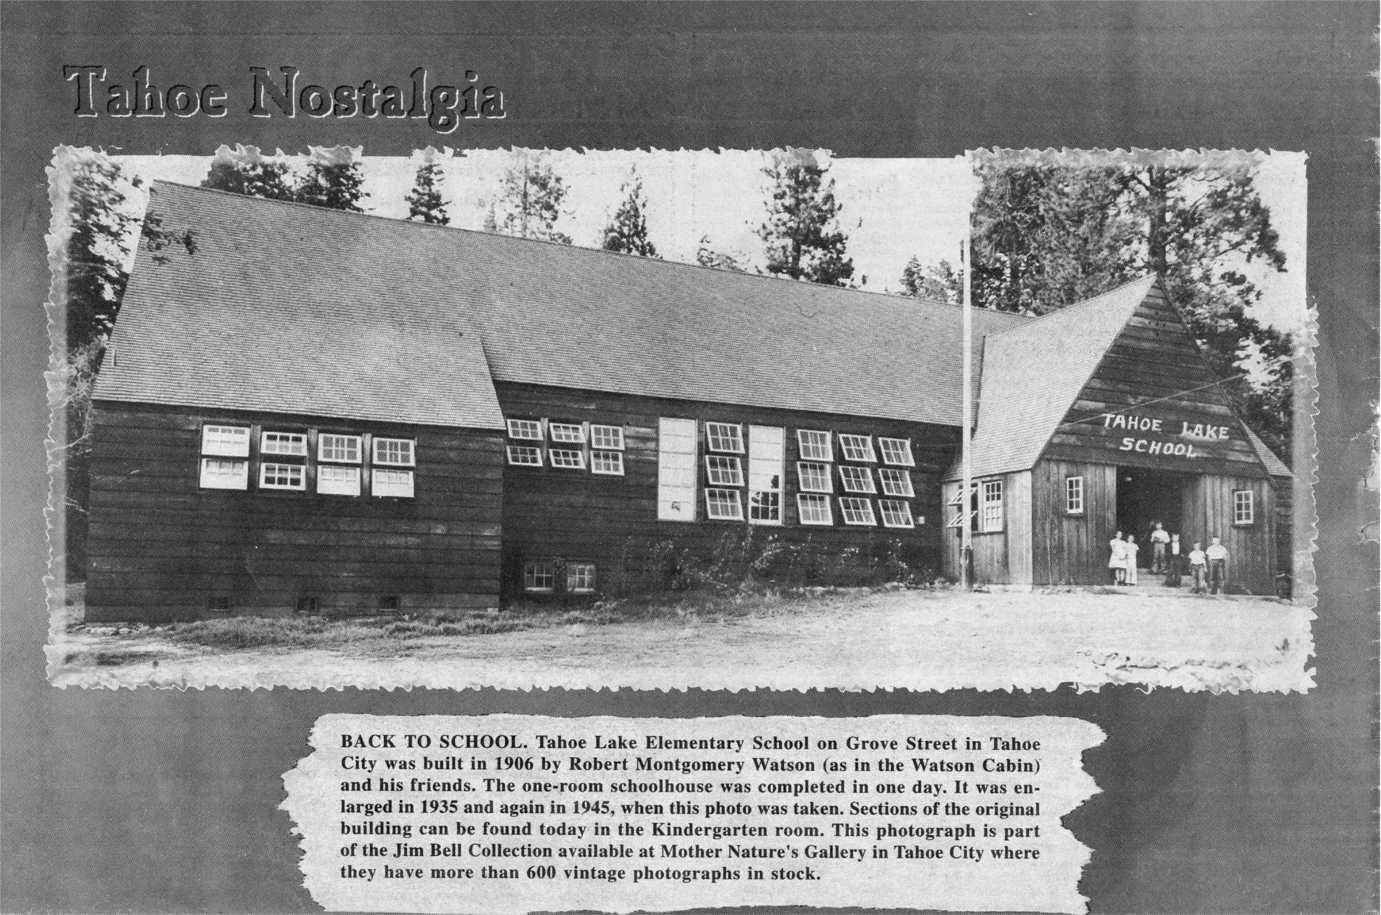 Photograph of the Tahoe Lake school in 1945 with a description of the school's history on the bottom of the photograph. Image courtesy of the University of Nevada, Reno.